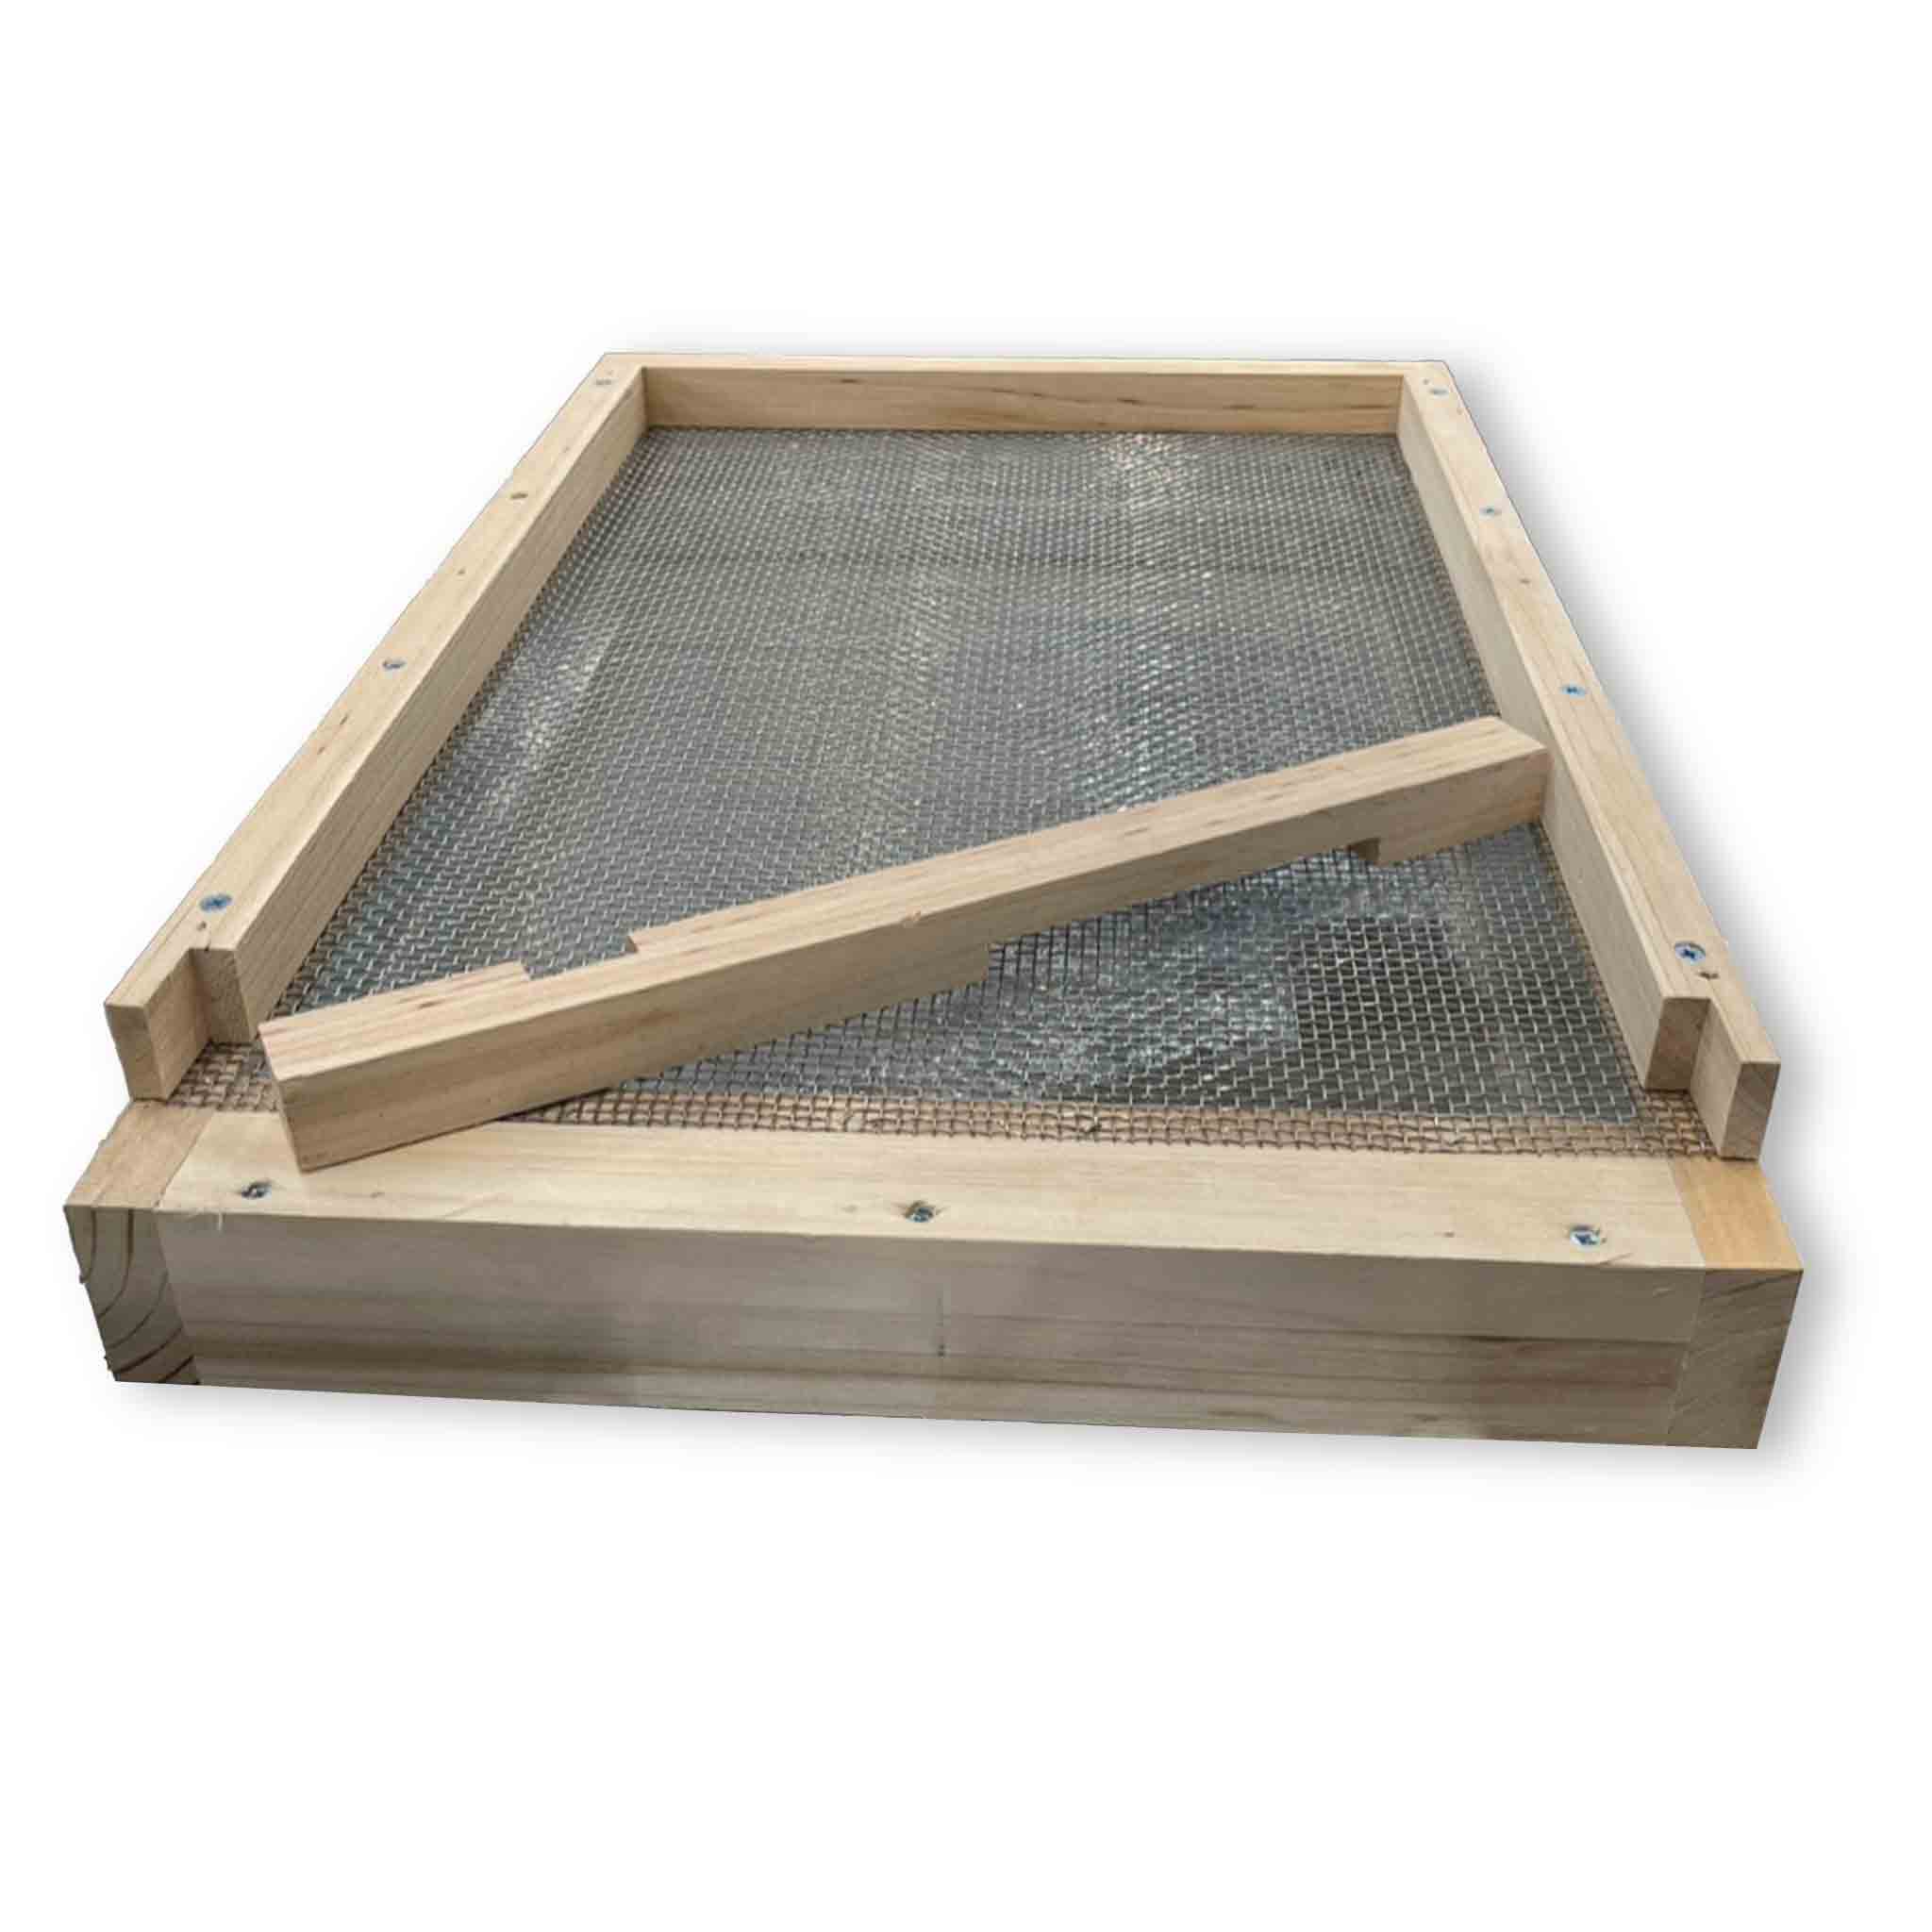 Screened Ventilation Bottom Board with Metal Pest Control Draw Tray - Floors collection by Buzzbee Beekeeping Supplies